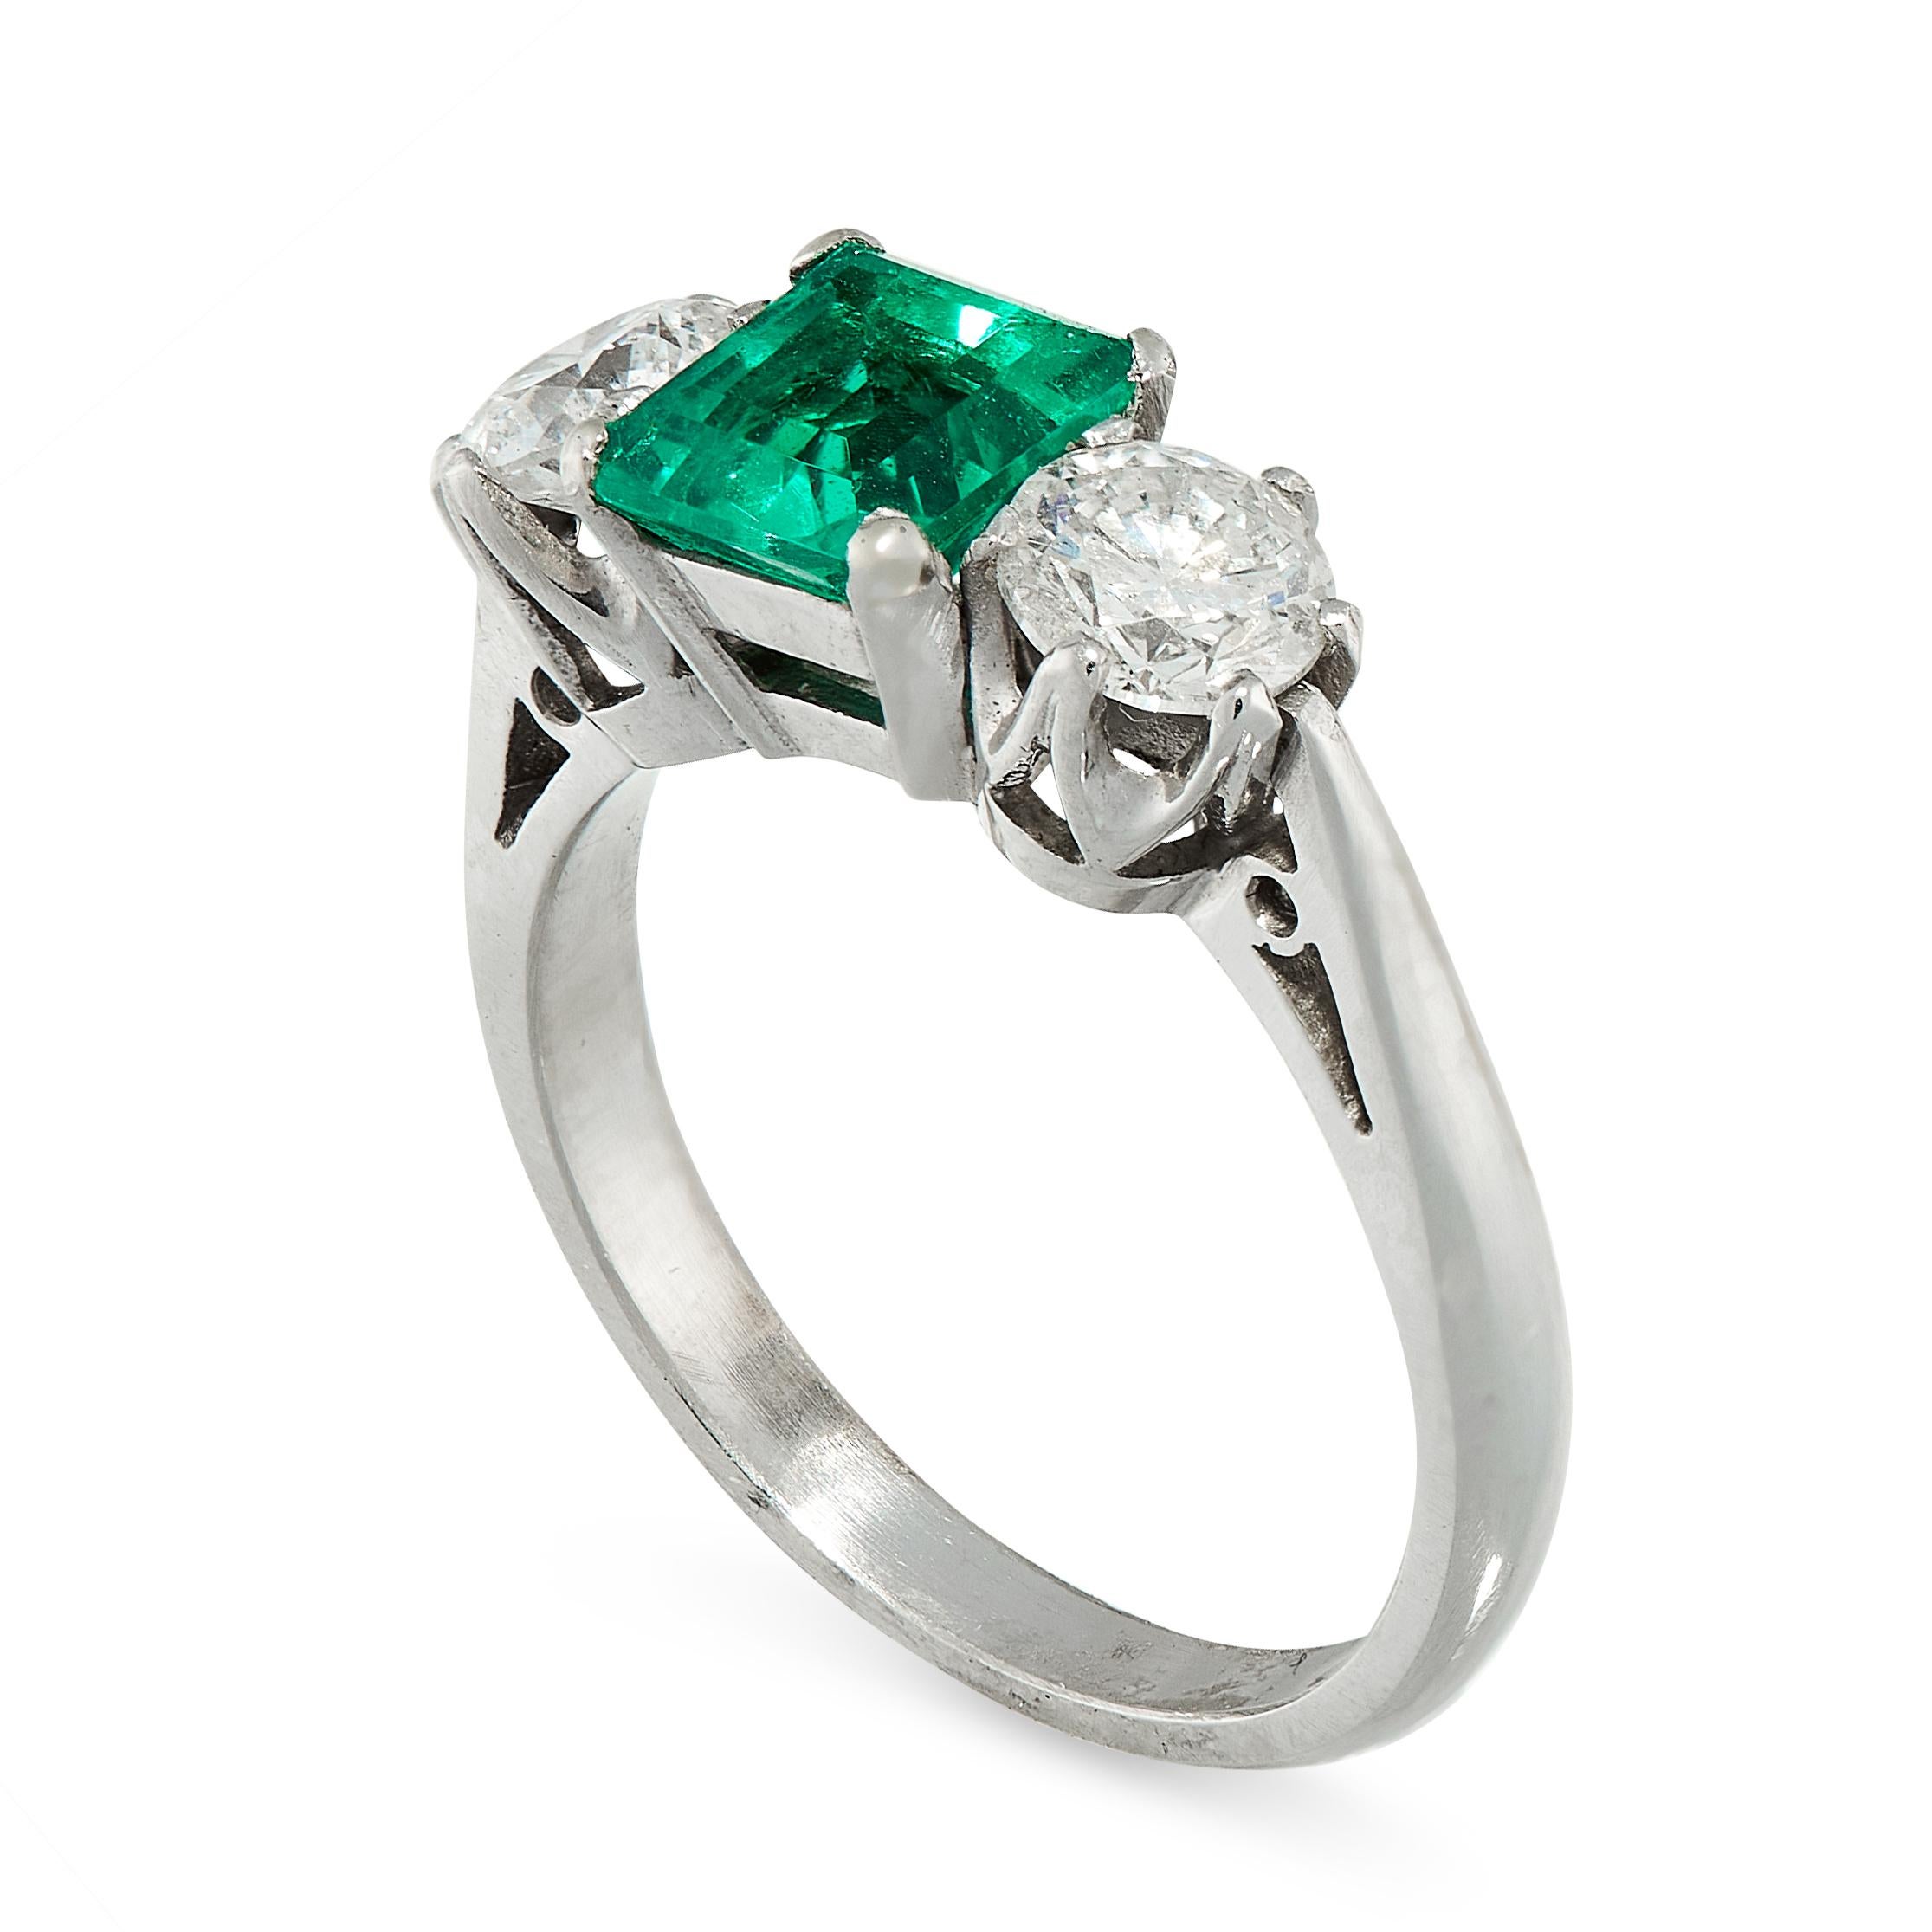 A stunning and classic ring that in the center is a square cut  1.1ct Columbian emerald set within platinum claws.  The emerald is a particularly good saturated green and contrasts well with the bright white diamonds. On either side are three